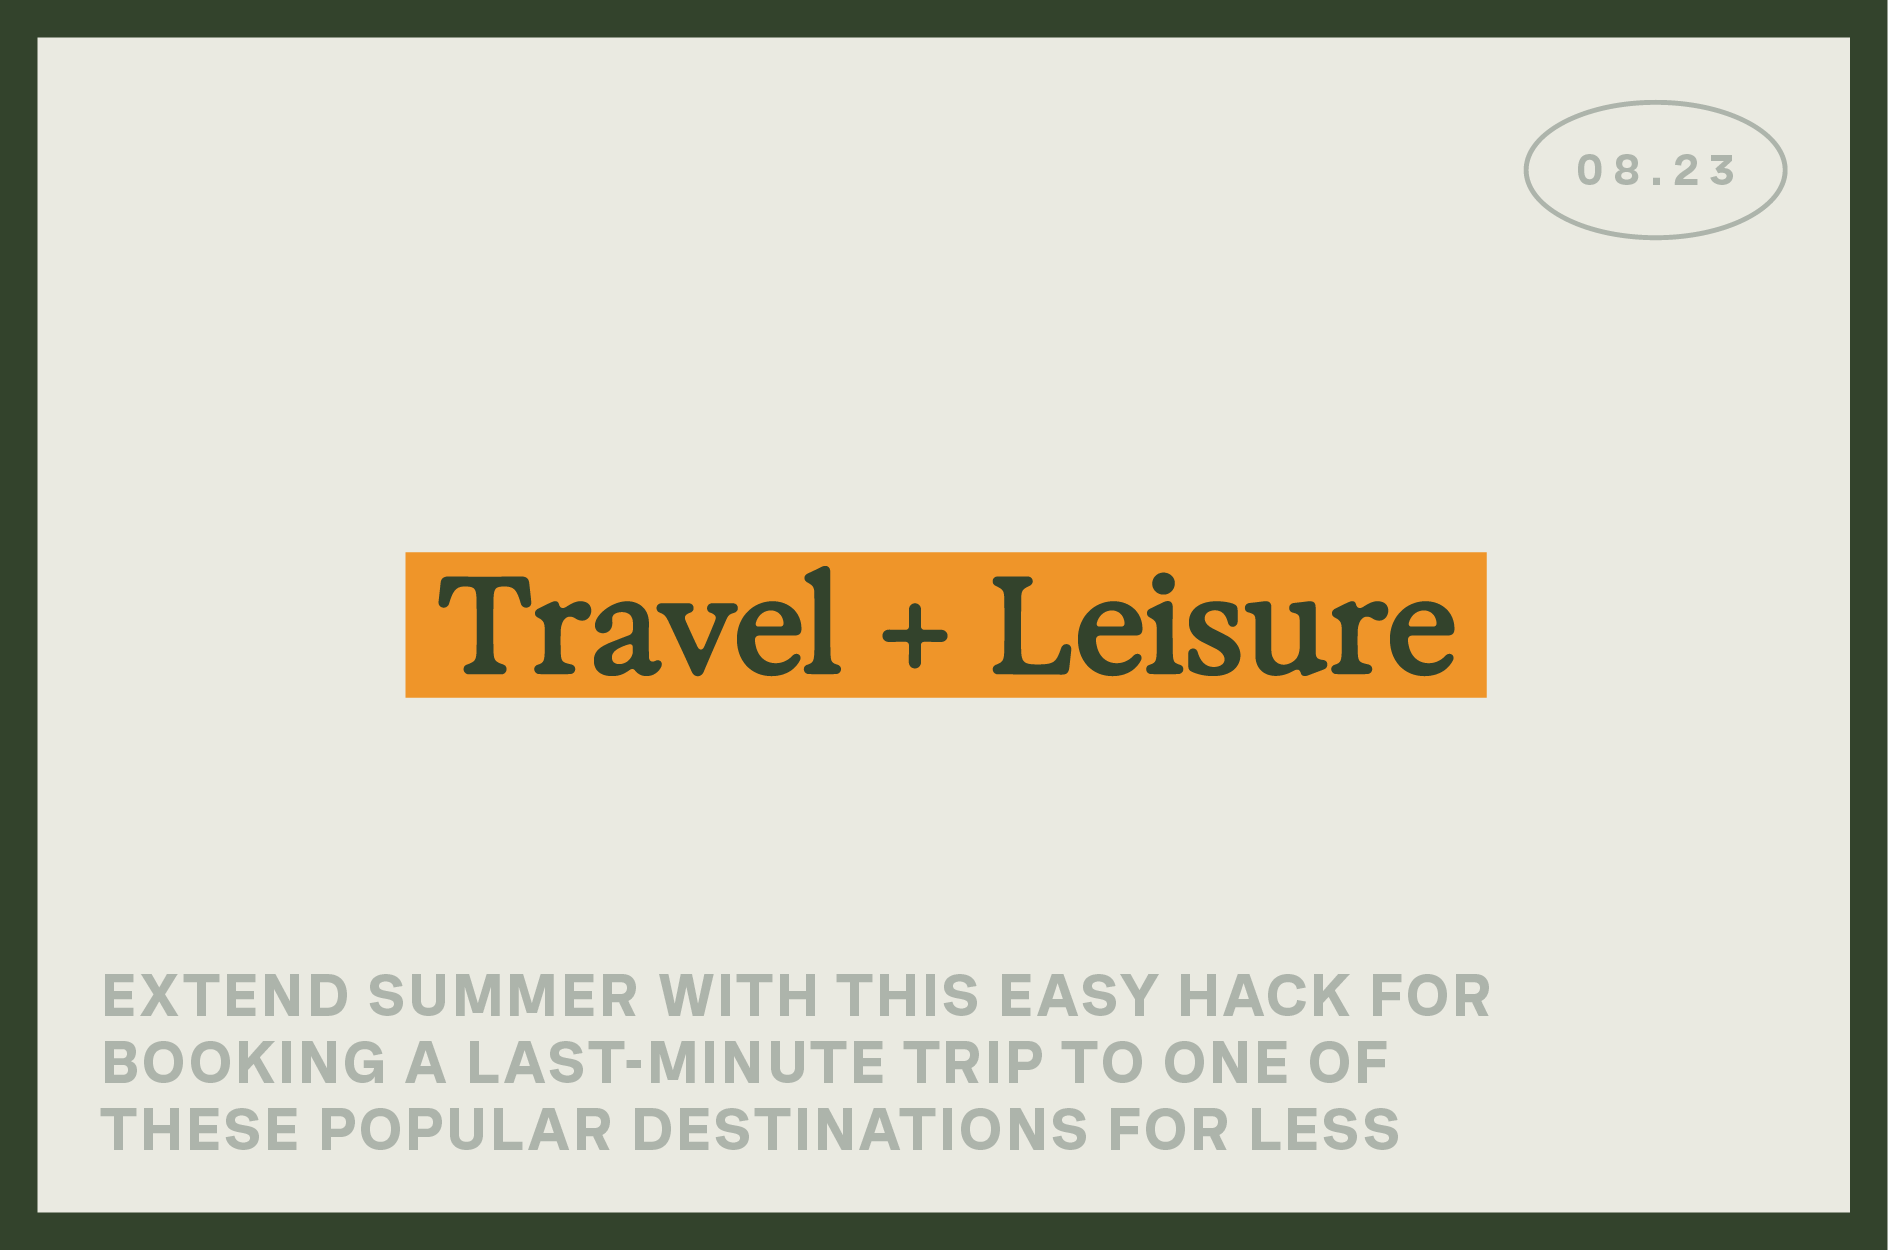 The "Travel + Leisure" banner shares a hack for extending summer with last-minute, budget-friendly trips.